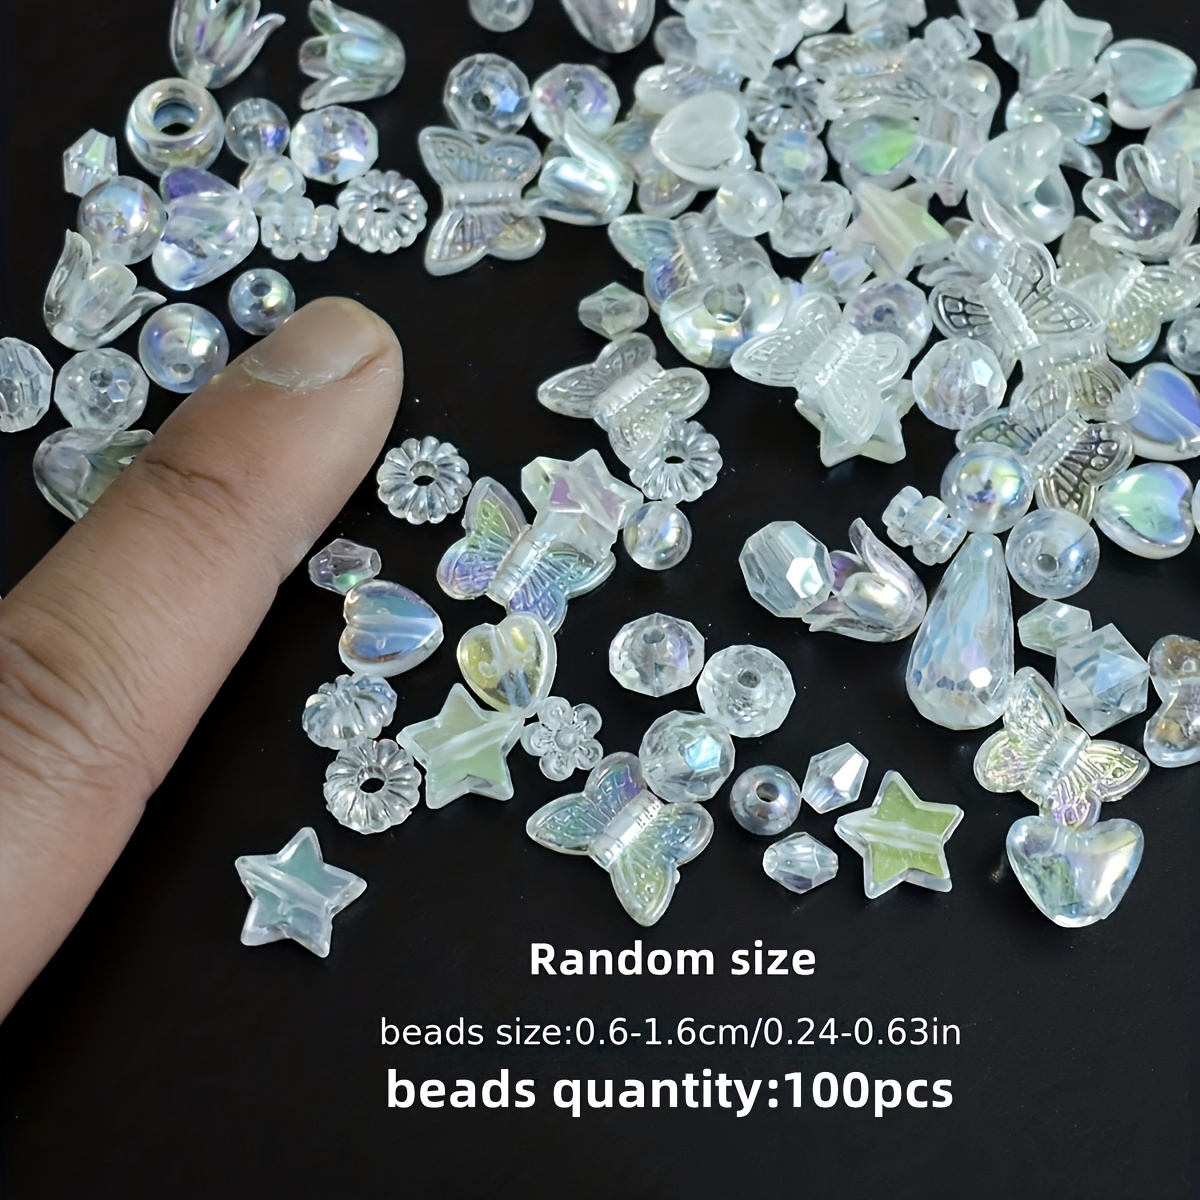 POP! Possibilities 8mm Translucent Faceted Beads by POP!